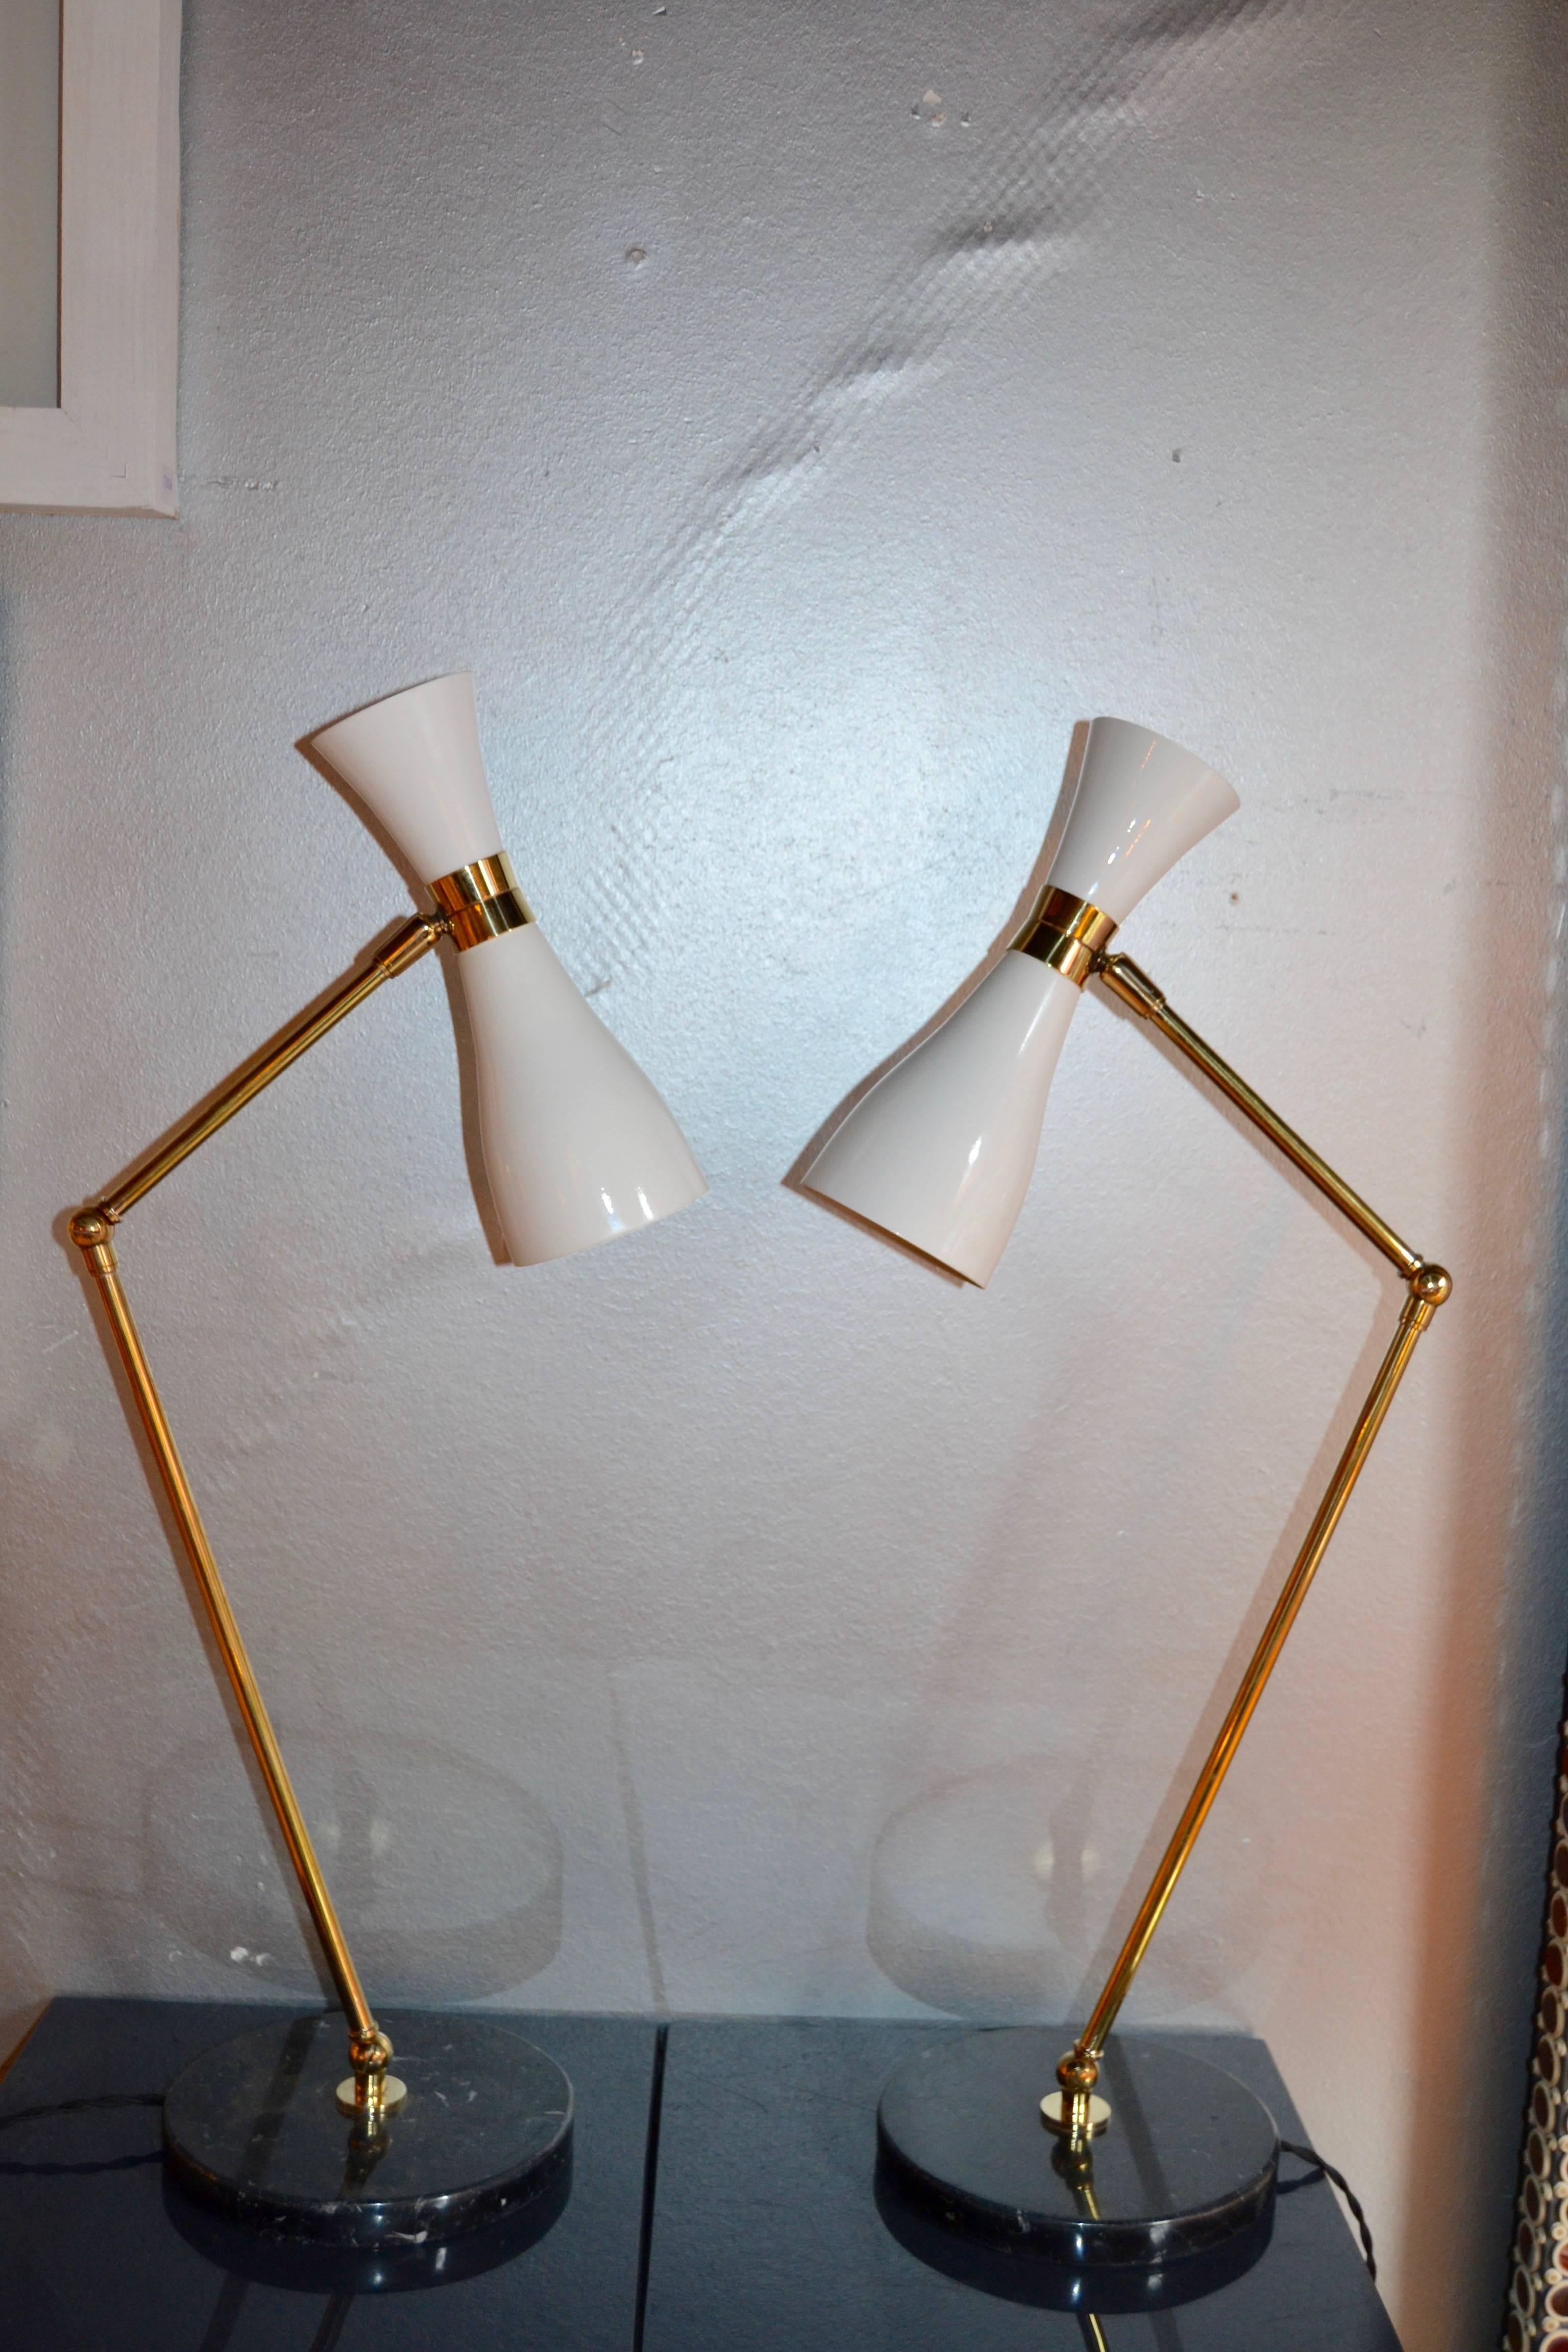 Pair of Italian 1970-1980s lamps with black white veined marble round base. 
Lamp is compose by three swivels to be adjusted in height and rotating metal shade painted on white.
The shade has two bulbs on each side creating a nice light